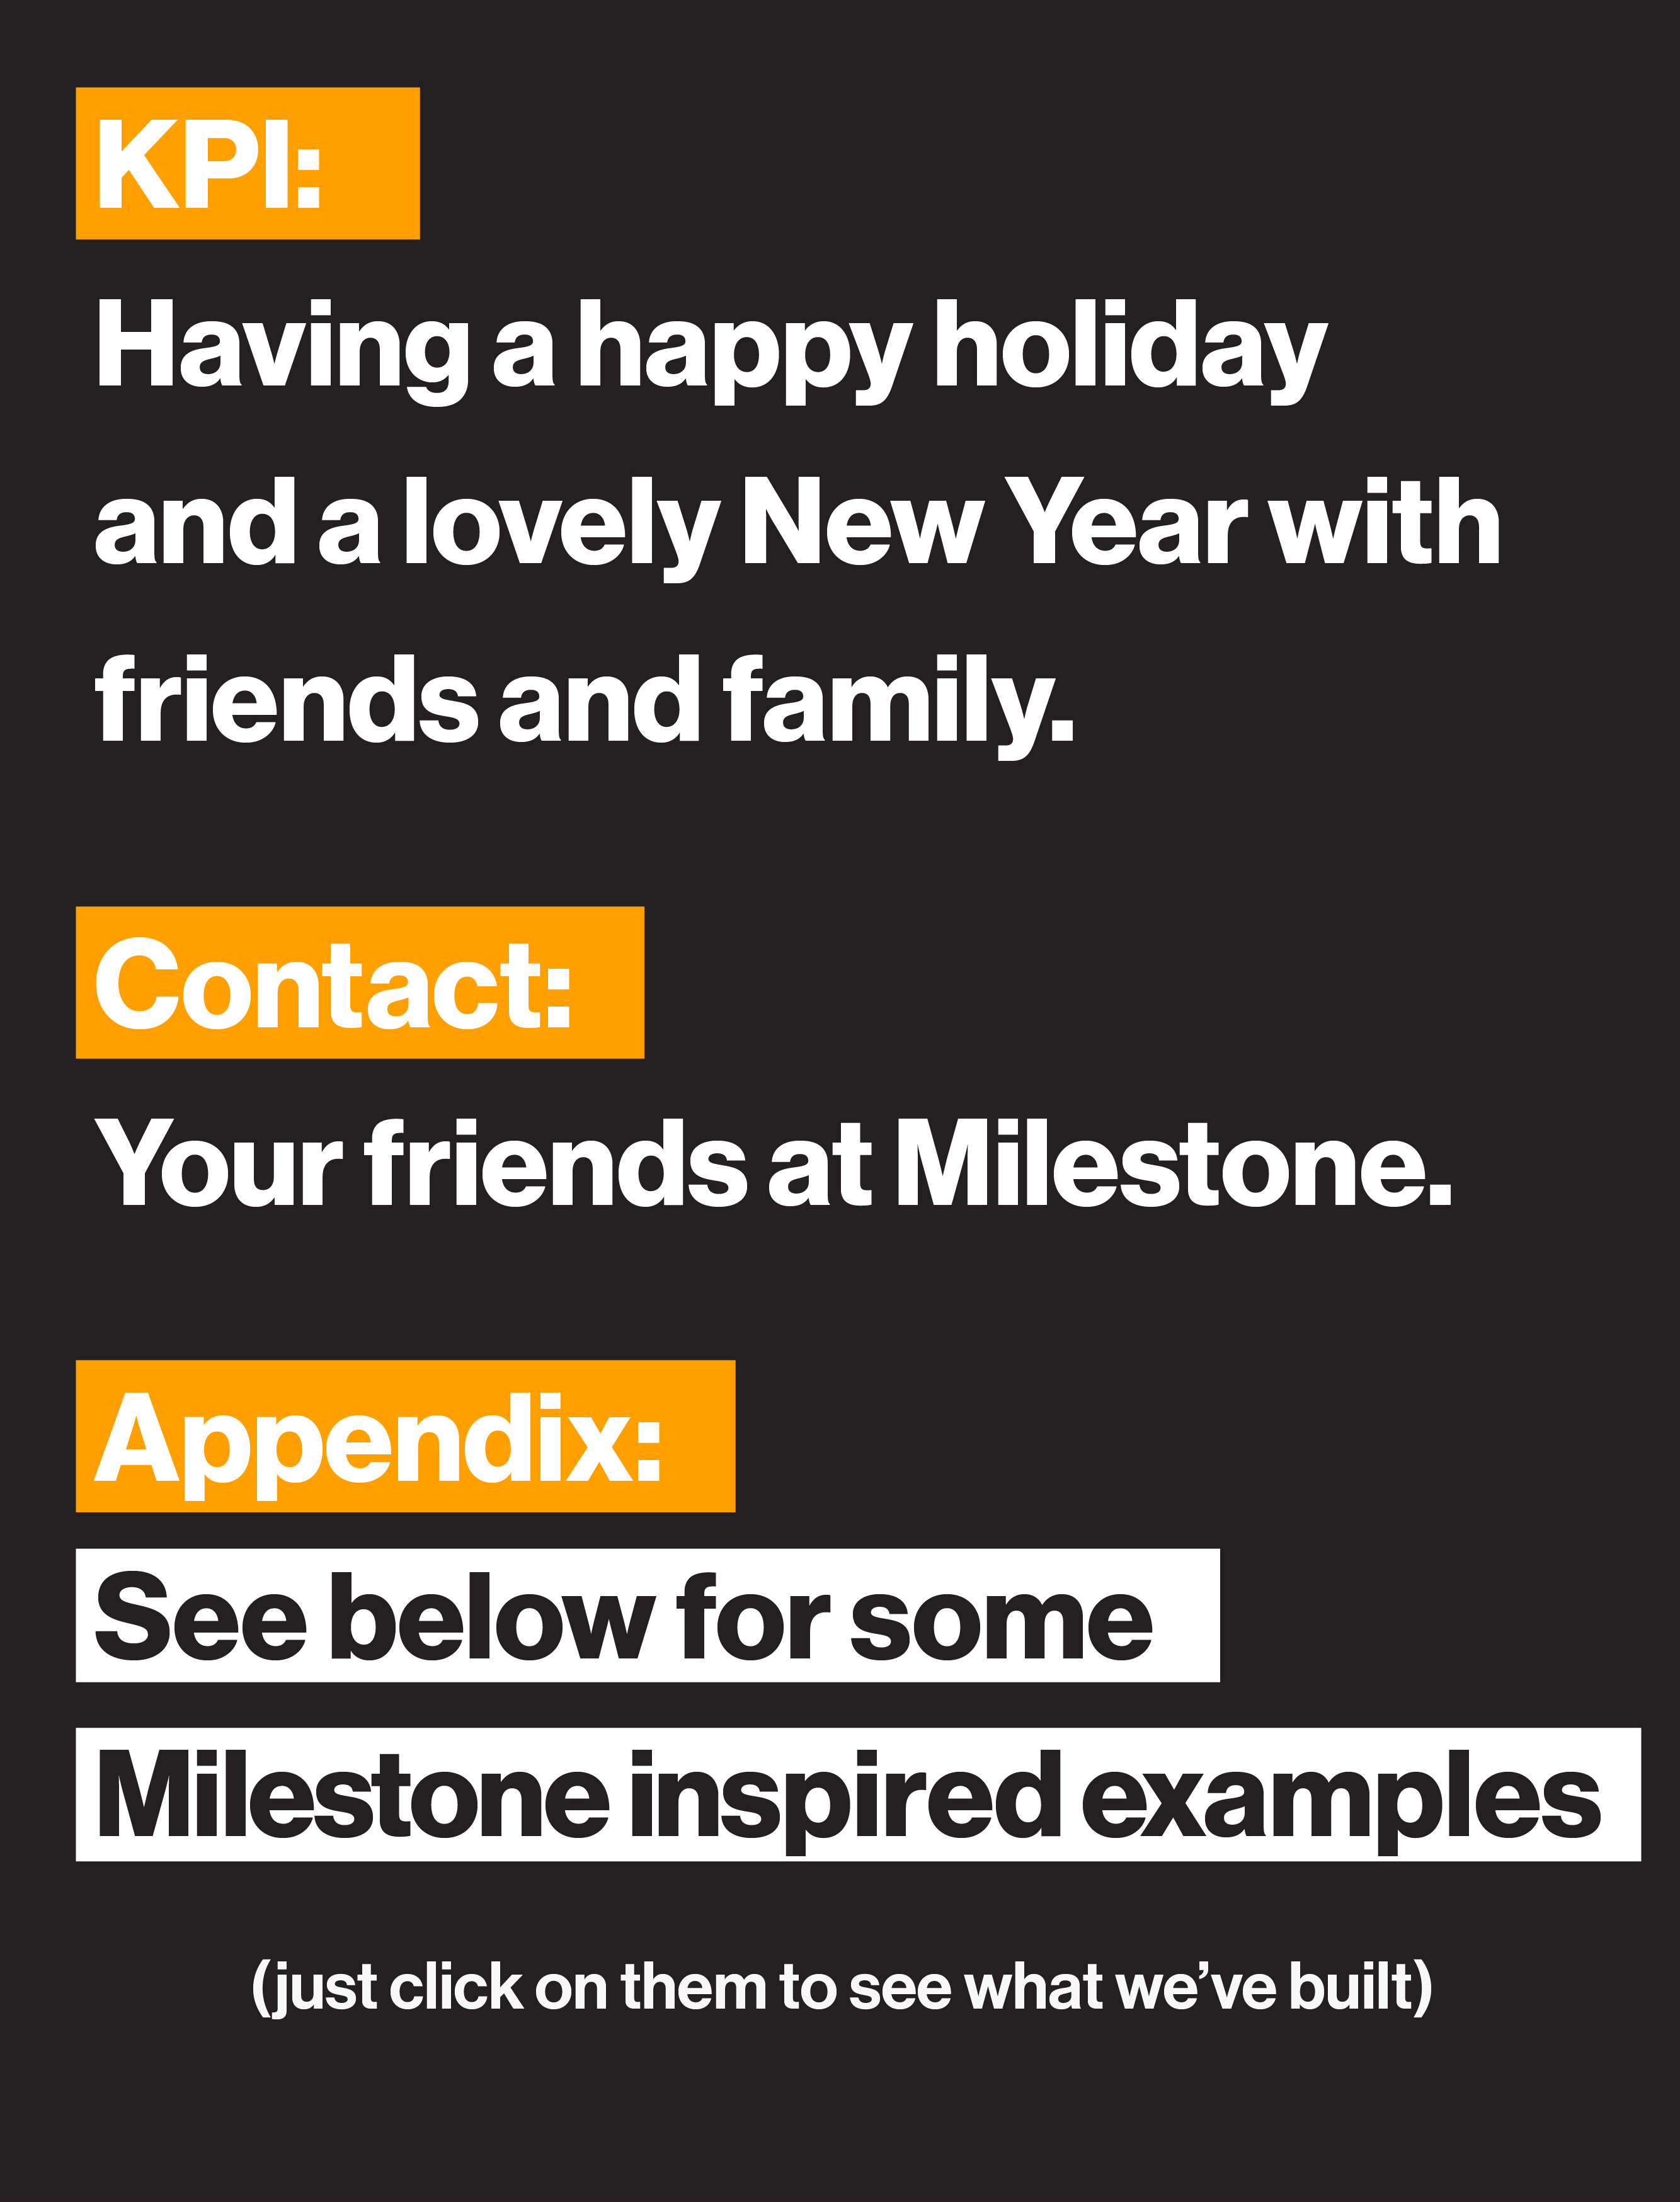 KPI: Having a happy holiday and a lovely New Year with friends and family. Contact: Your friends at Milestone.